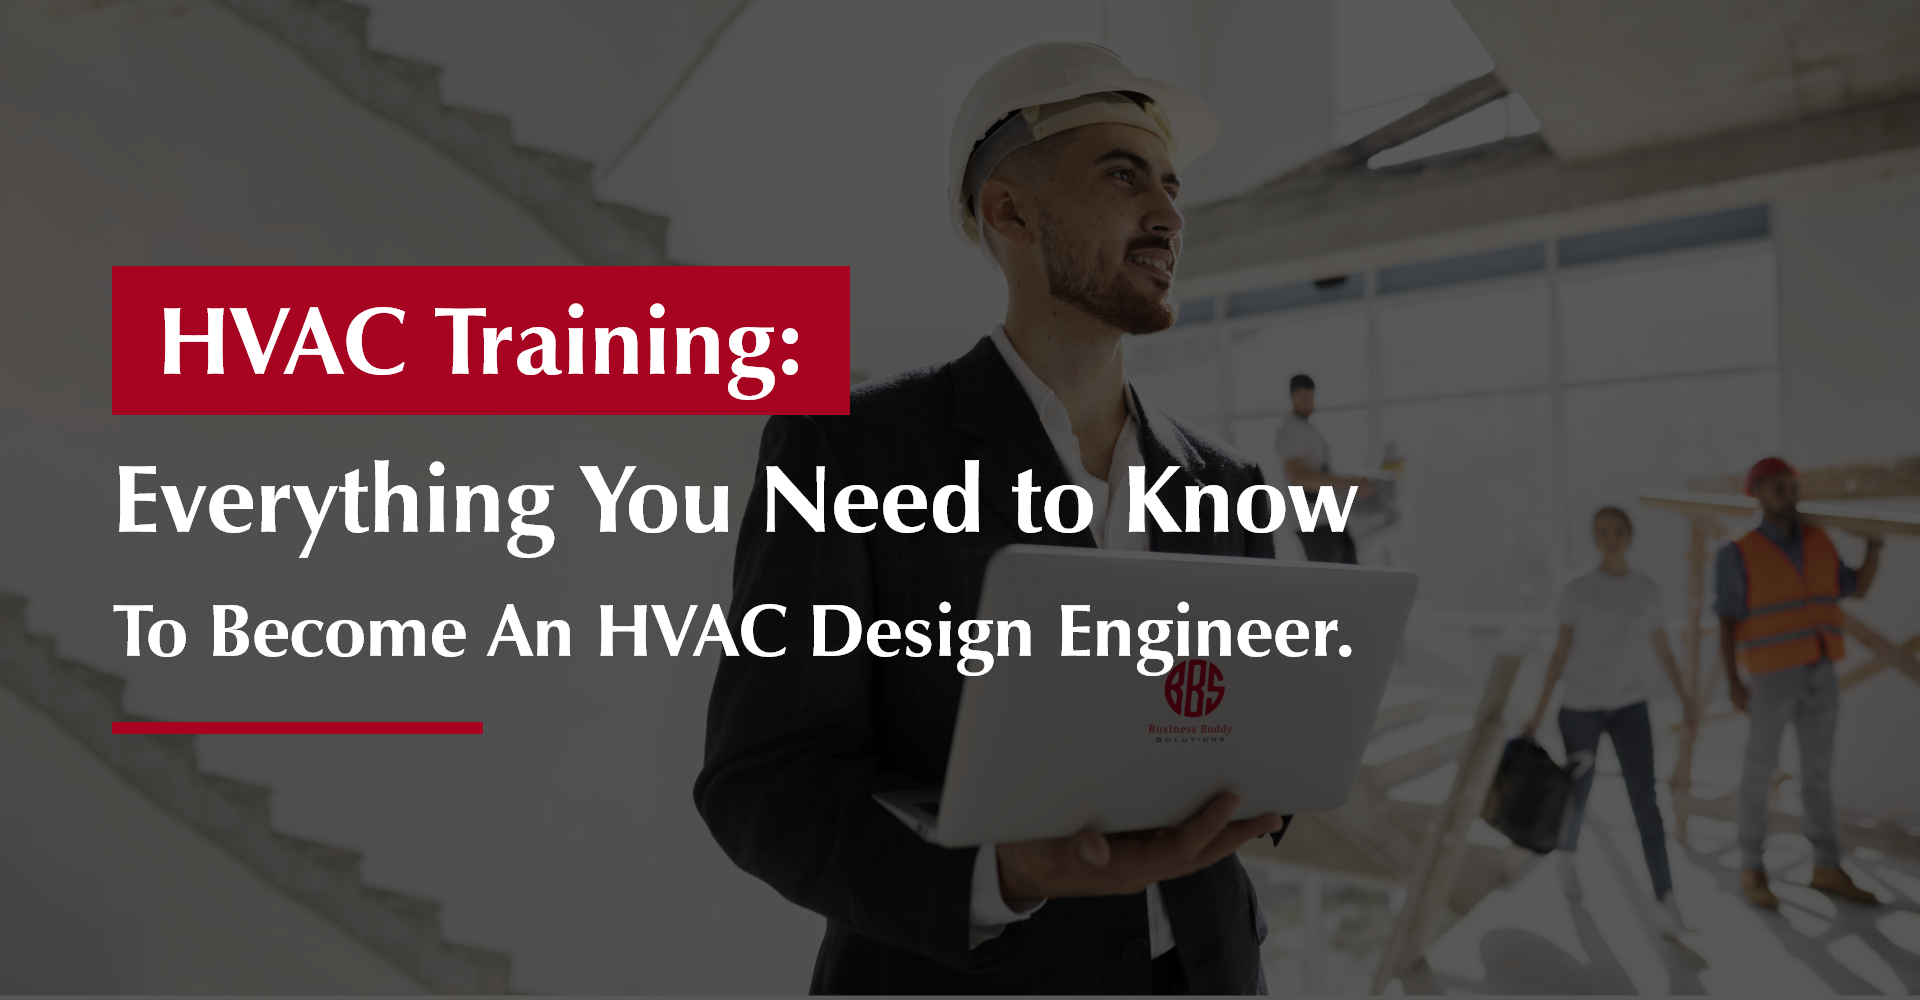 HVAC Training: Everything You Need To Know To Become An HVAC Engineer